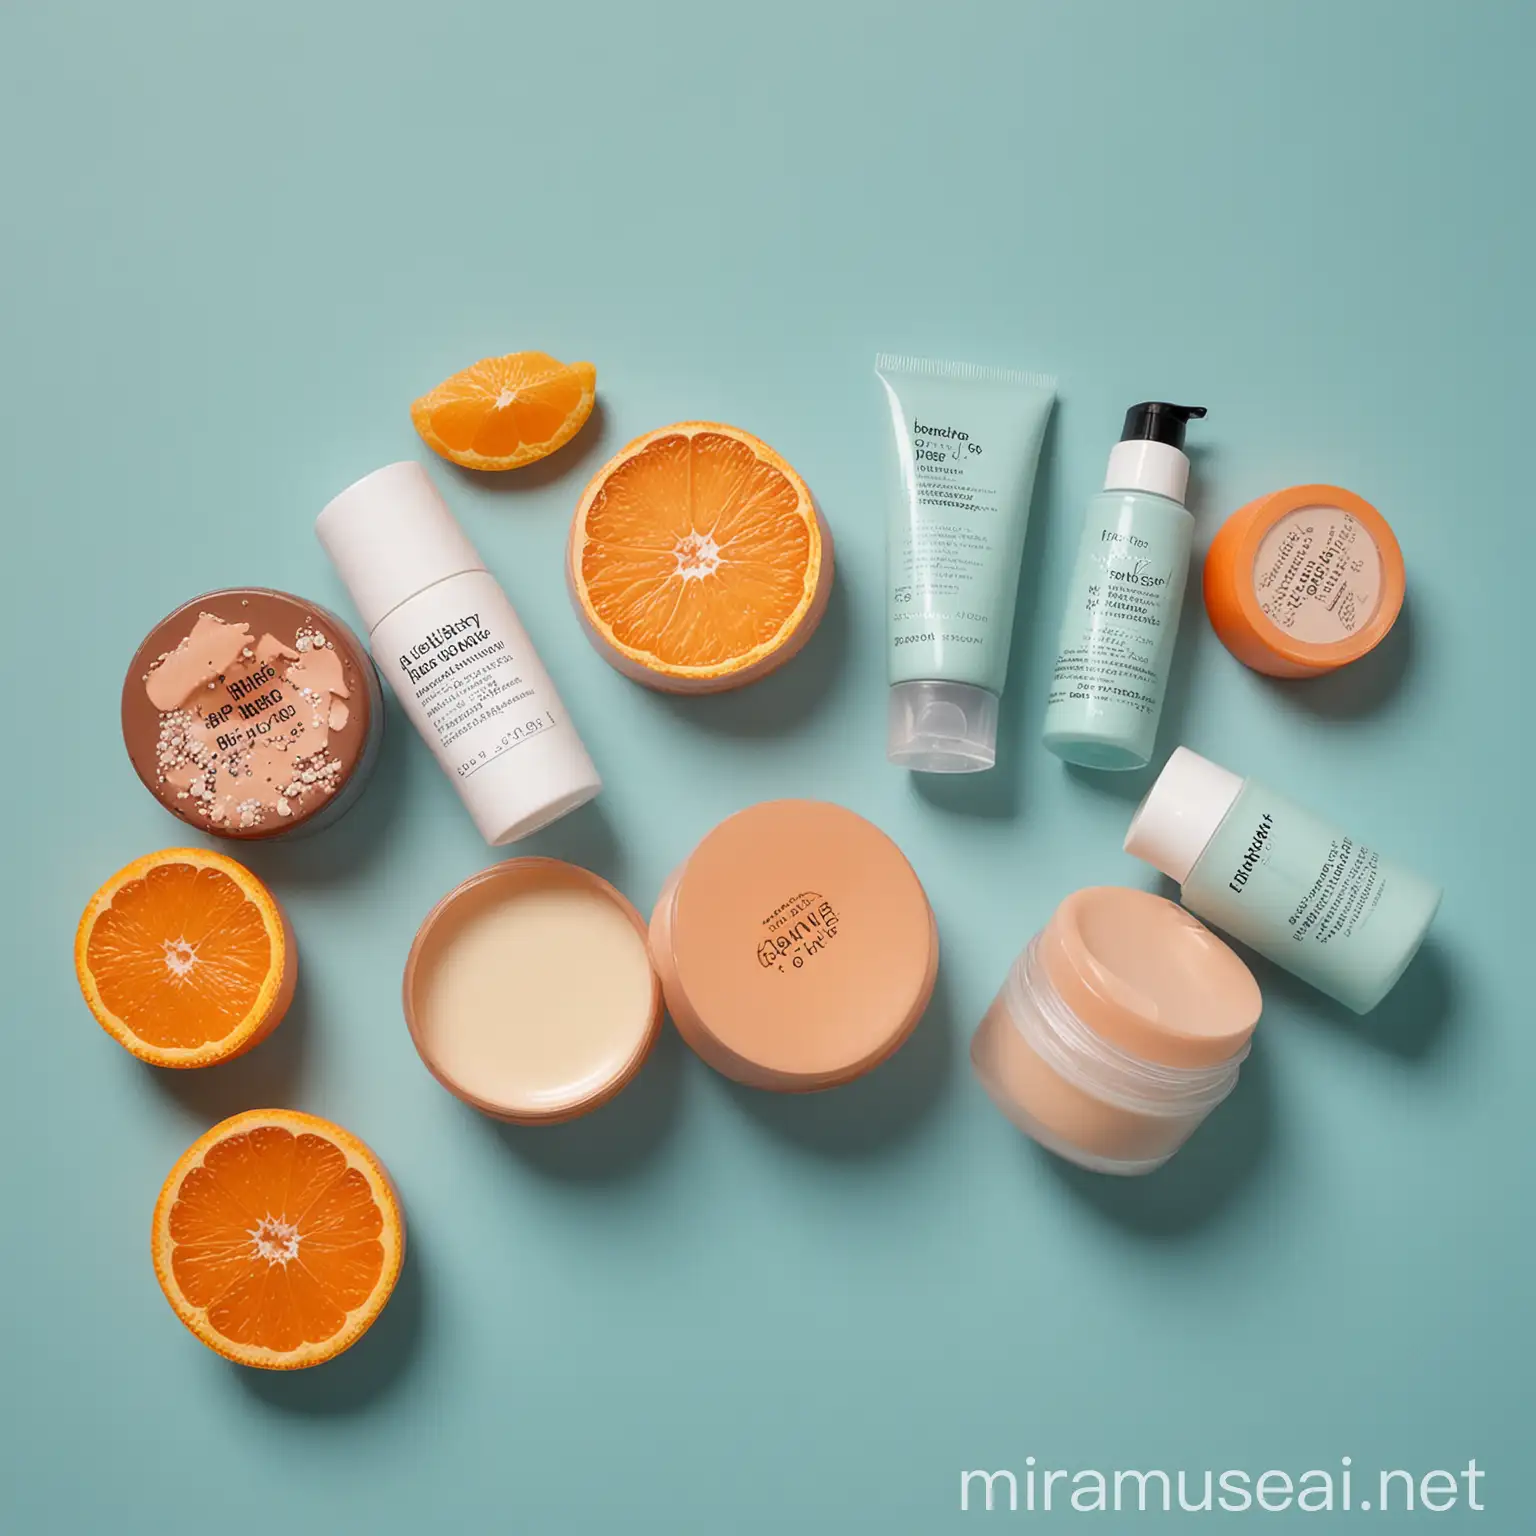 Freshly Cosmetics Products Displayed on Blue and Orange Backgrounds